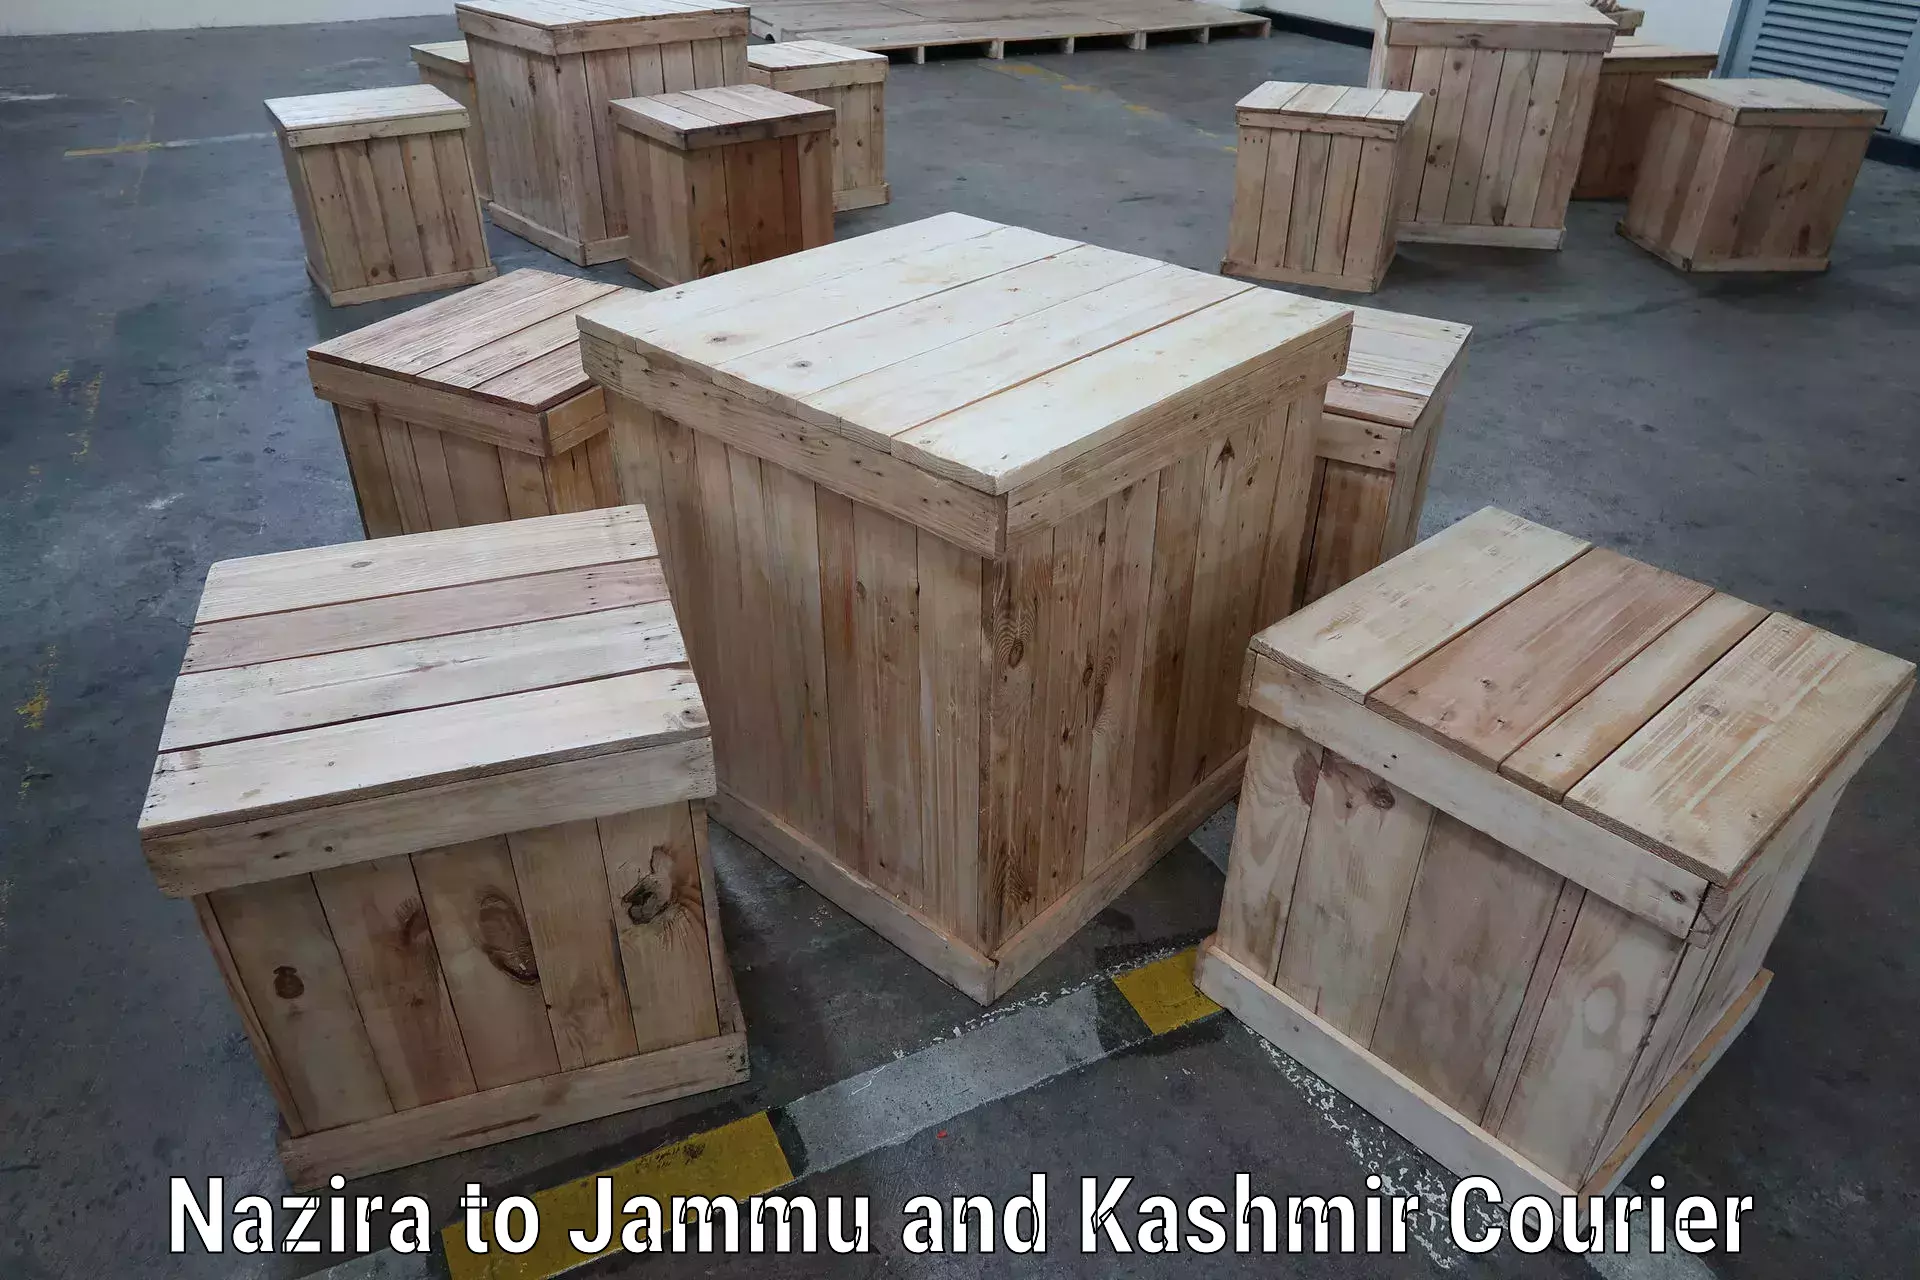 Cargo delivery service Nazira to Jammu and Kashmir